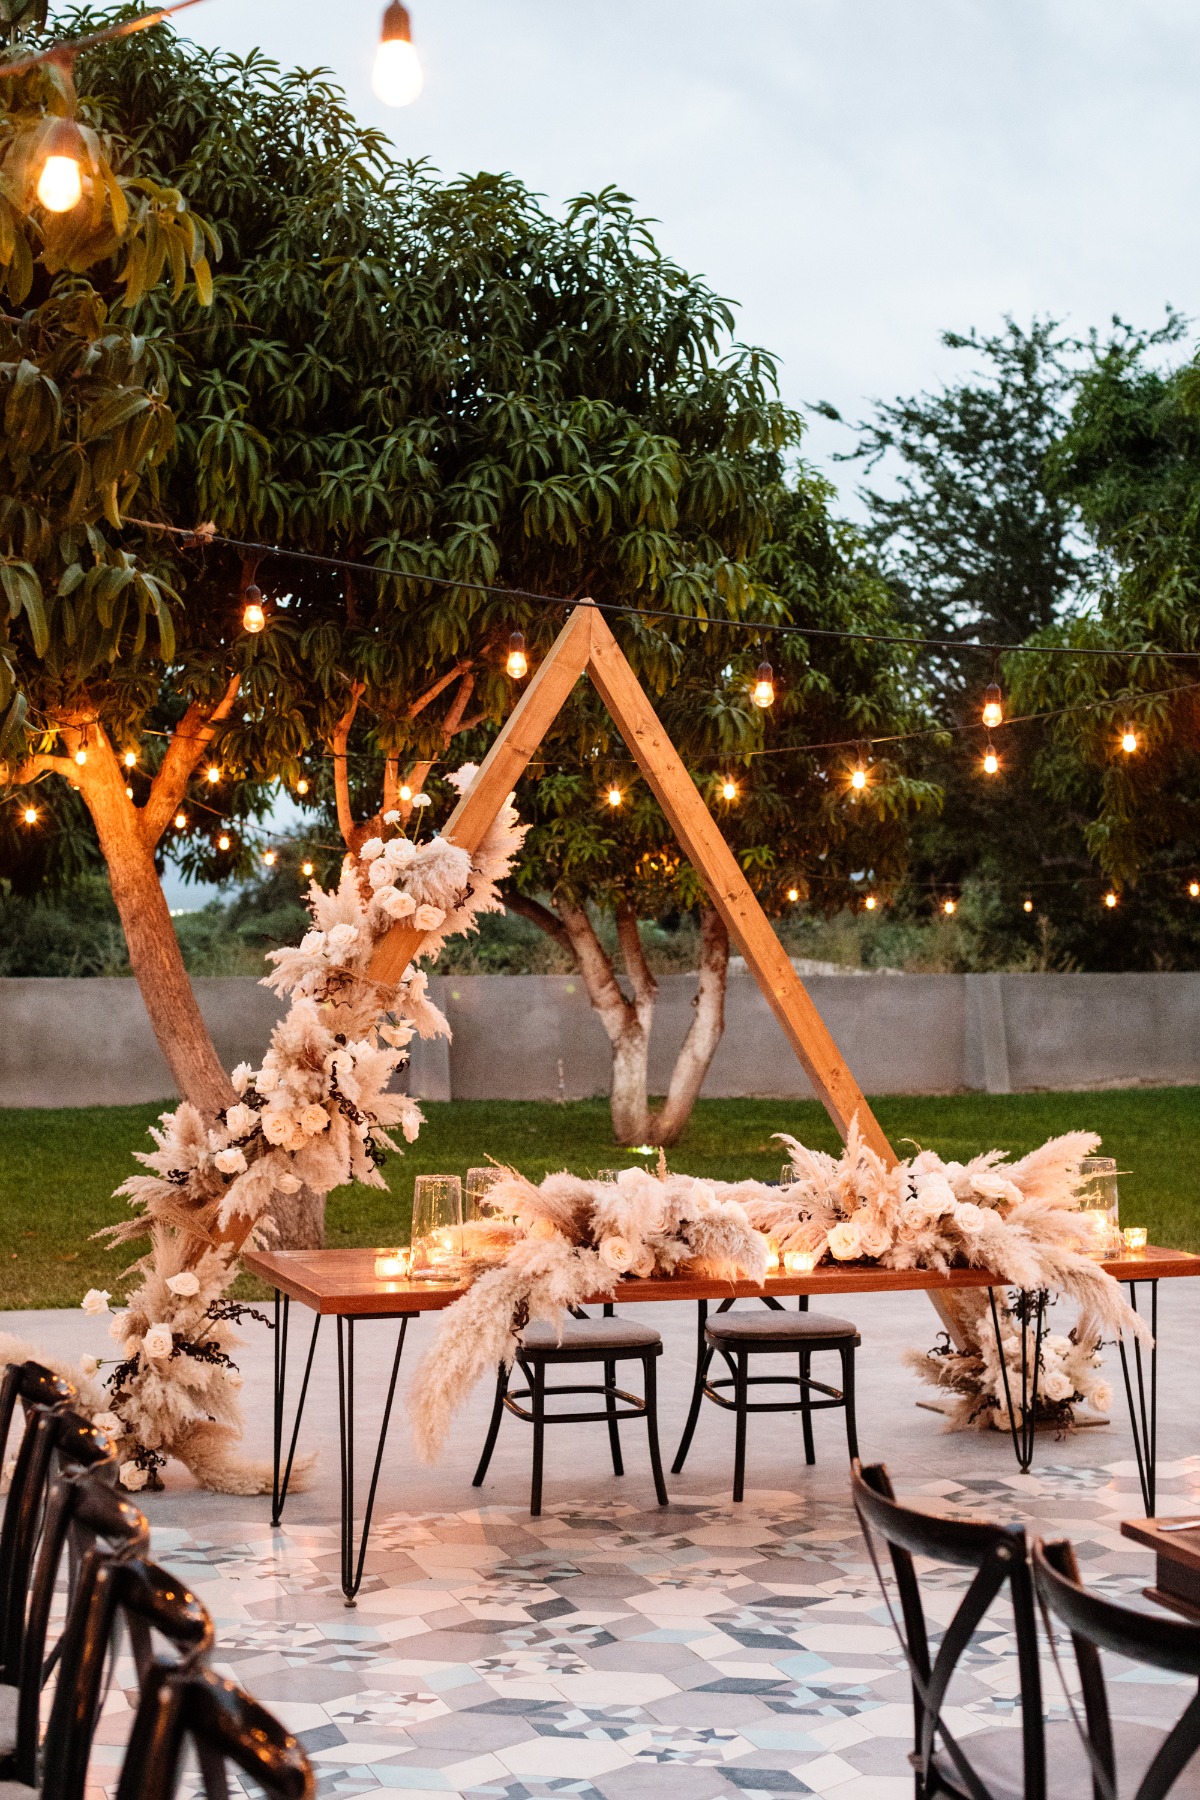 Triangle backdrop for the sweetheart table